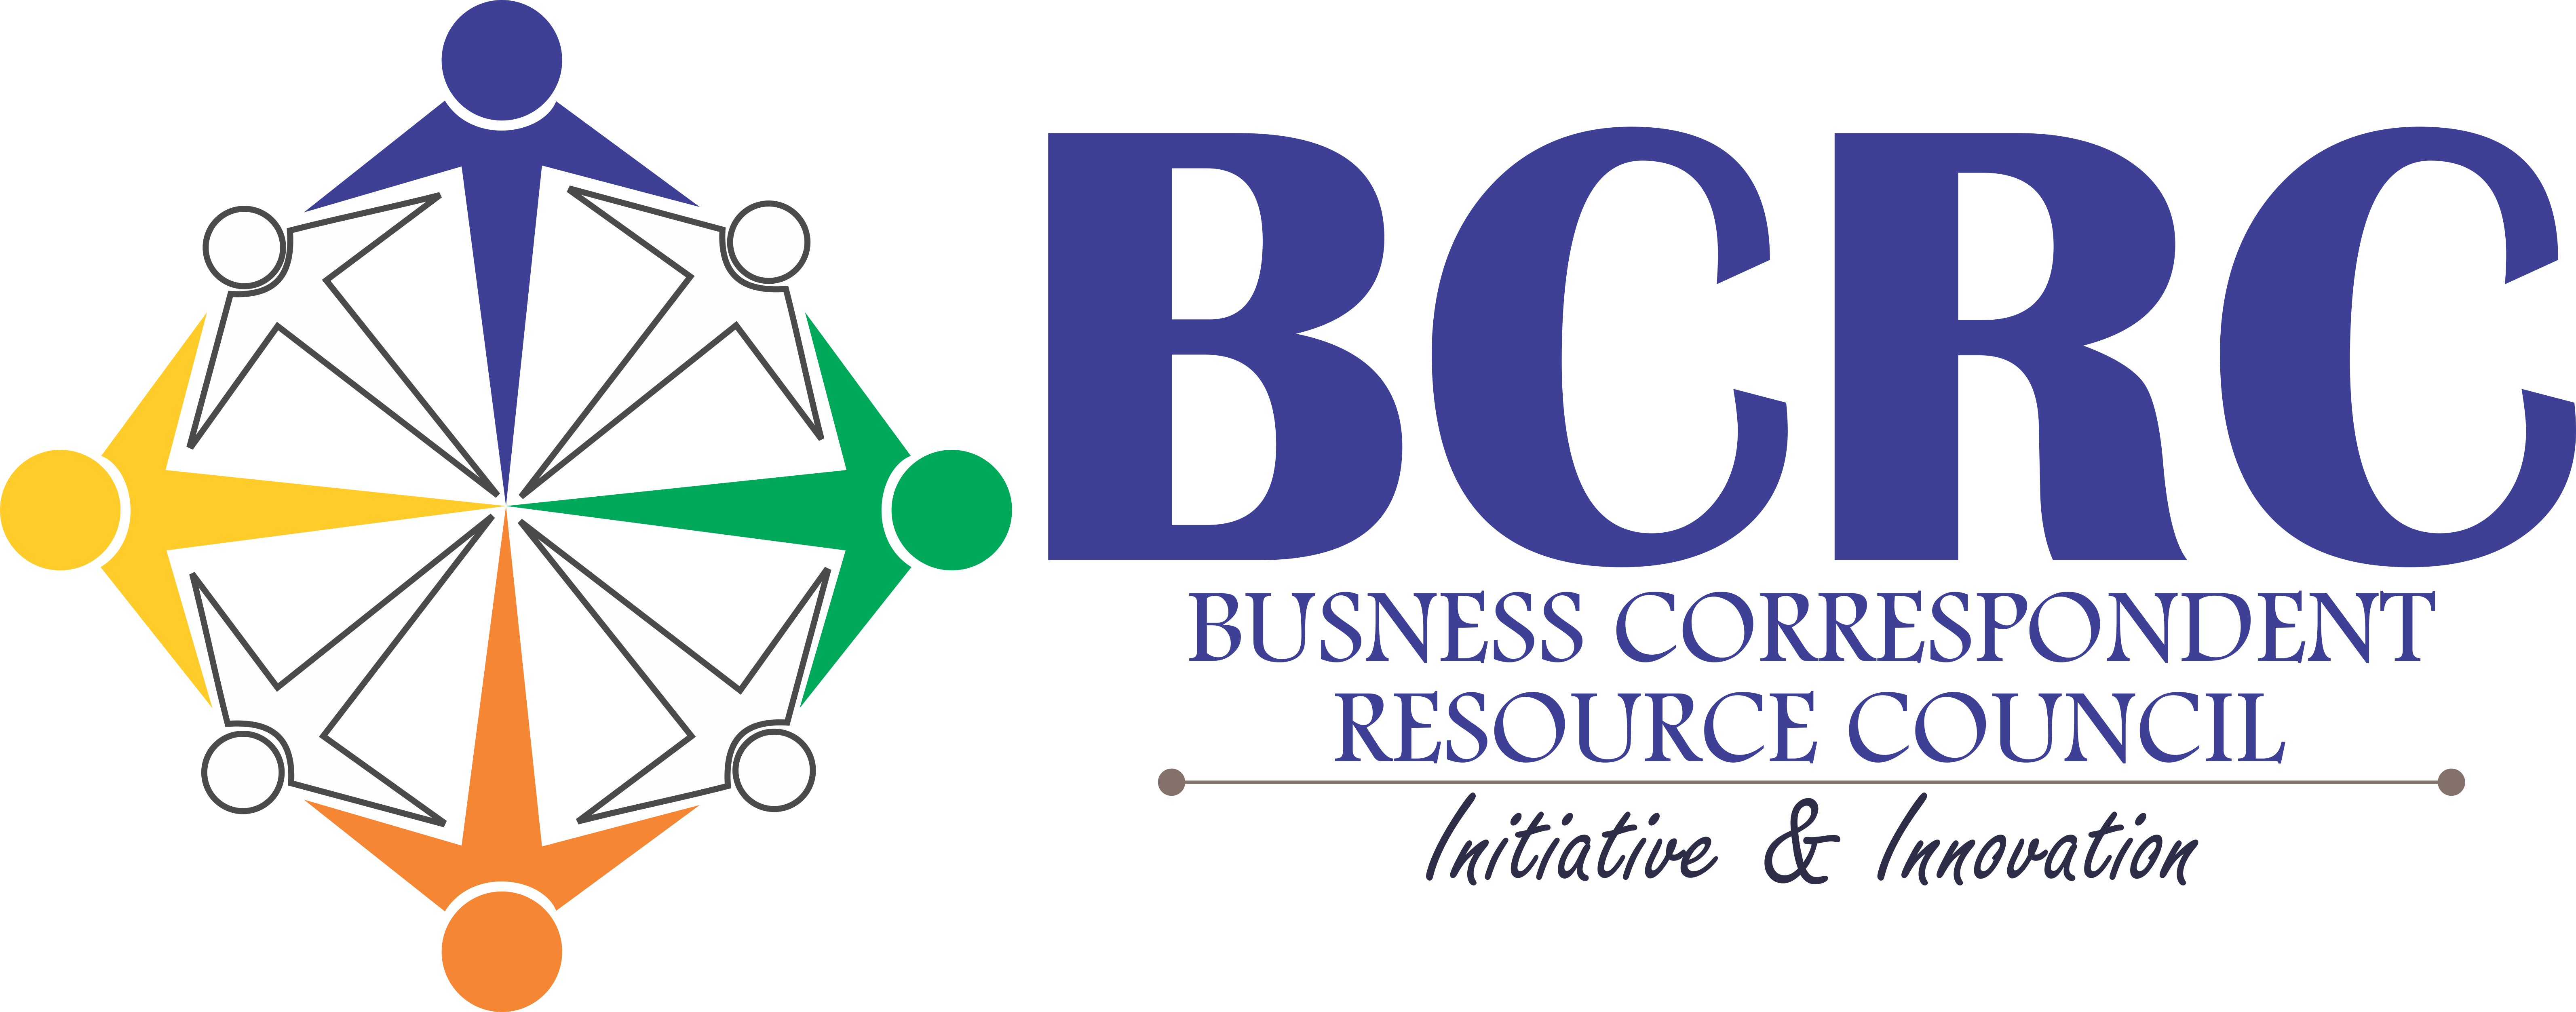 Business Correspondents  Resource  Council (BCRC) 1st January,21 